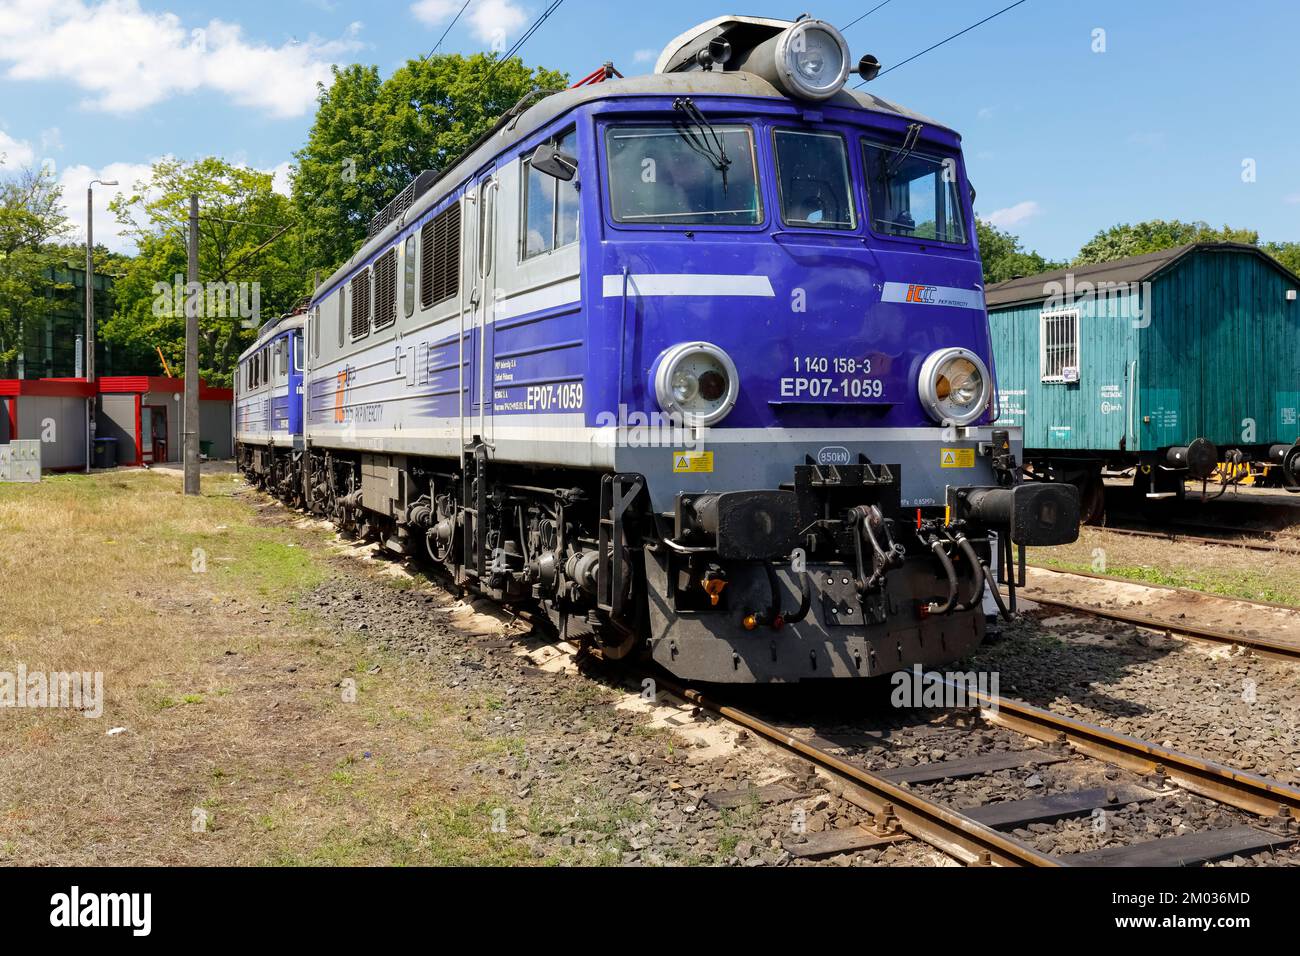 Kolobrzeg, Poland - June 23, 2016: EP07 electric locomotive is painted in white blue colors of PKP Intercity it is parked at the side track of the tra Stock Photo